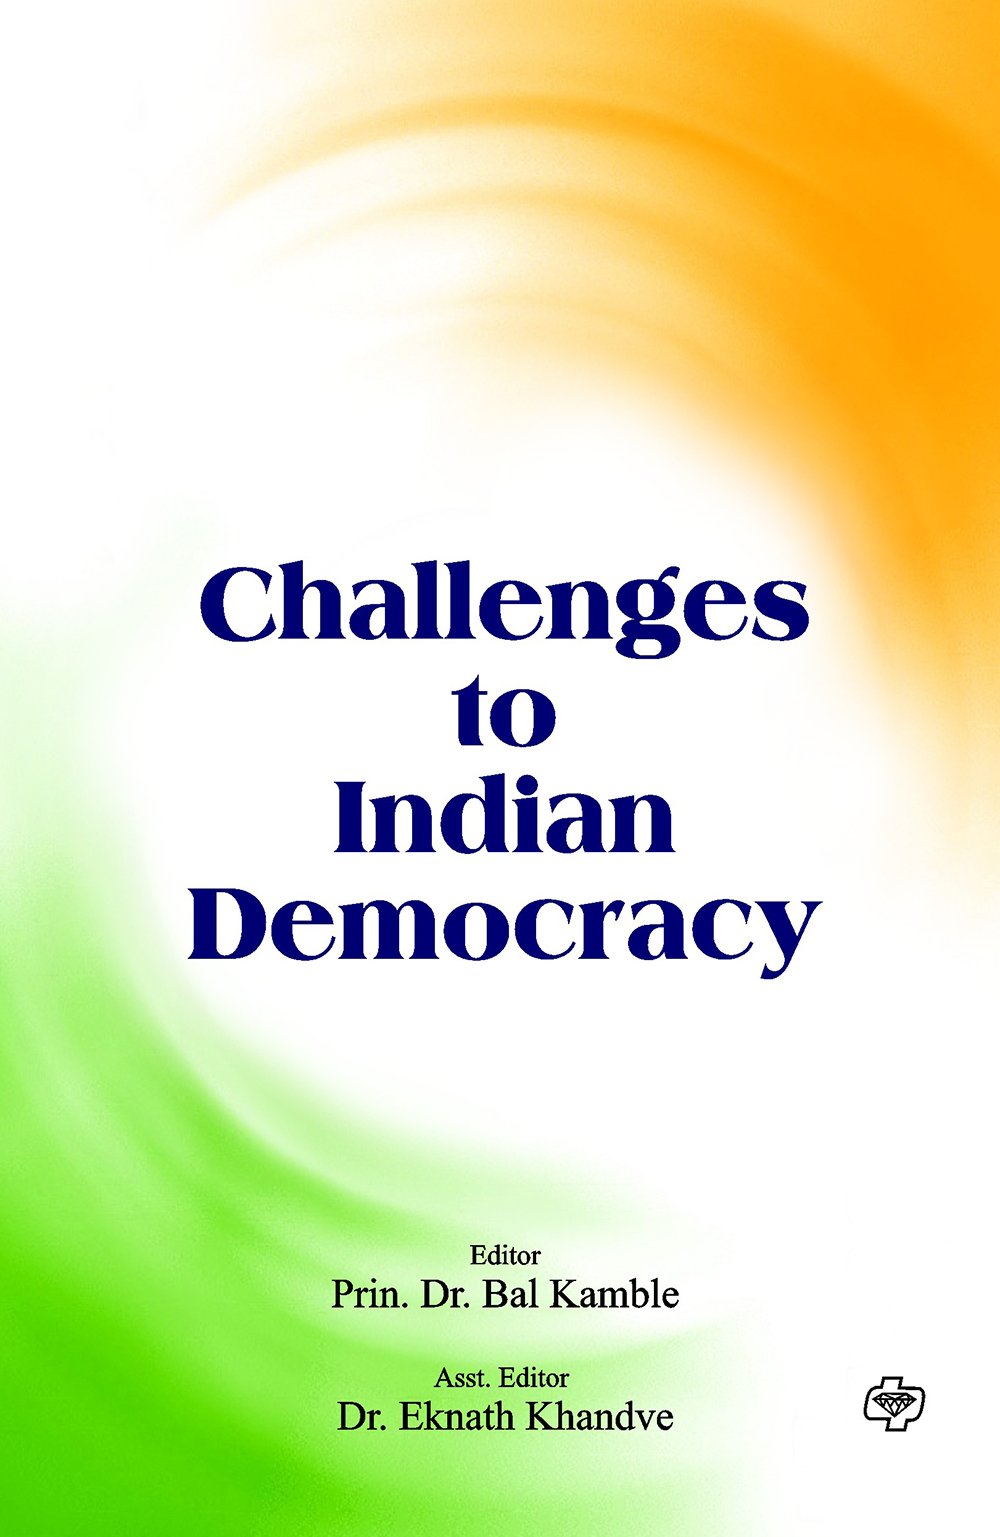 Challenges to Indian Democracy